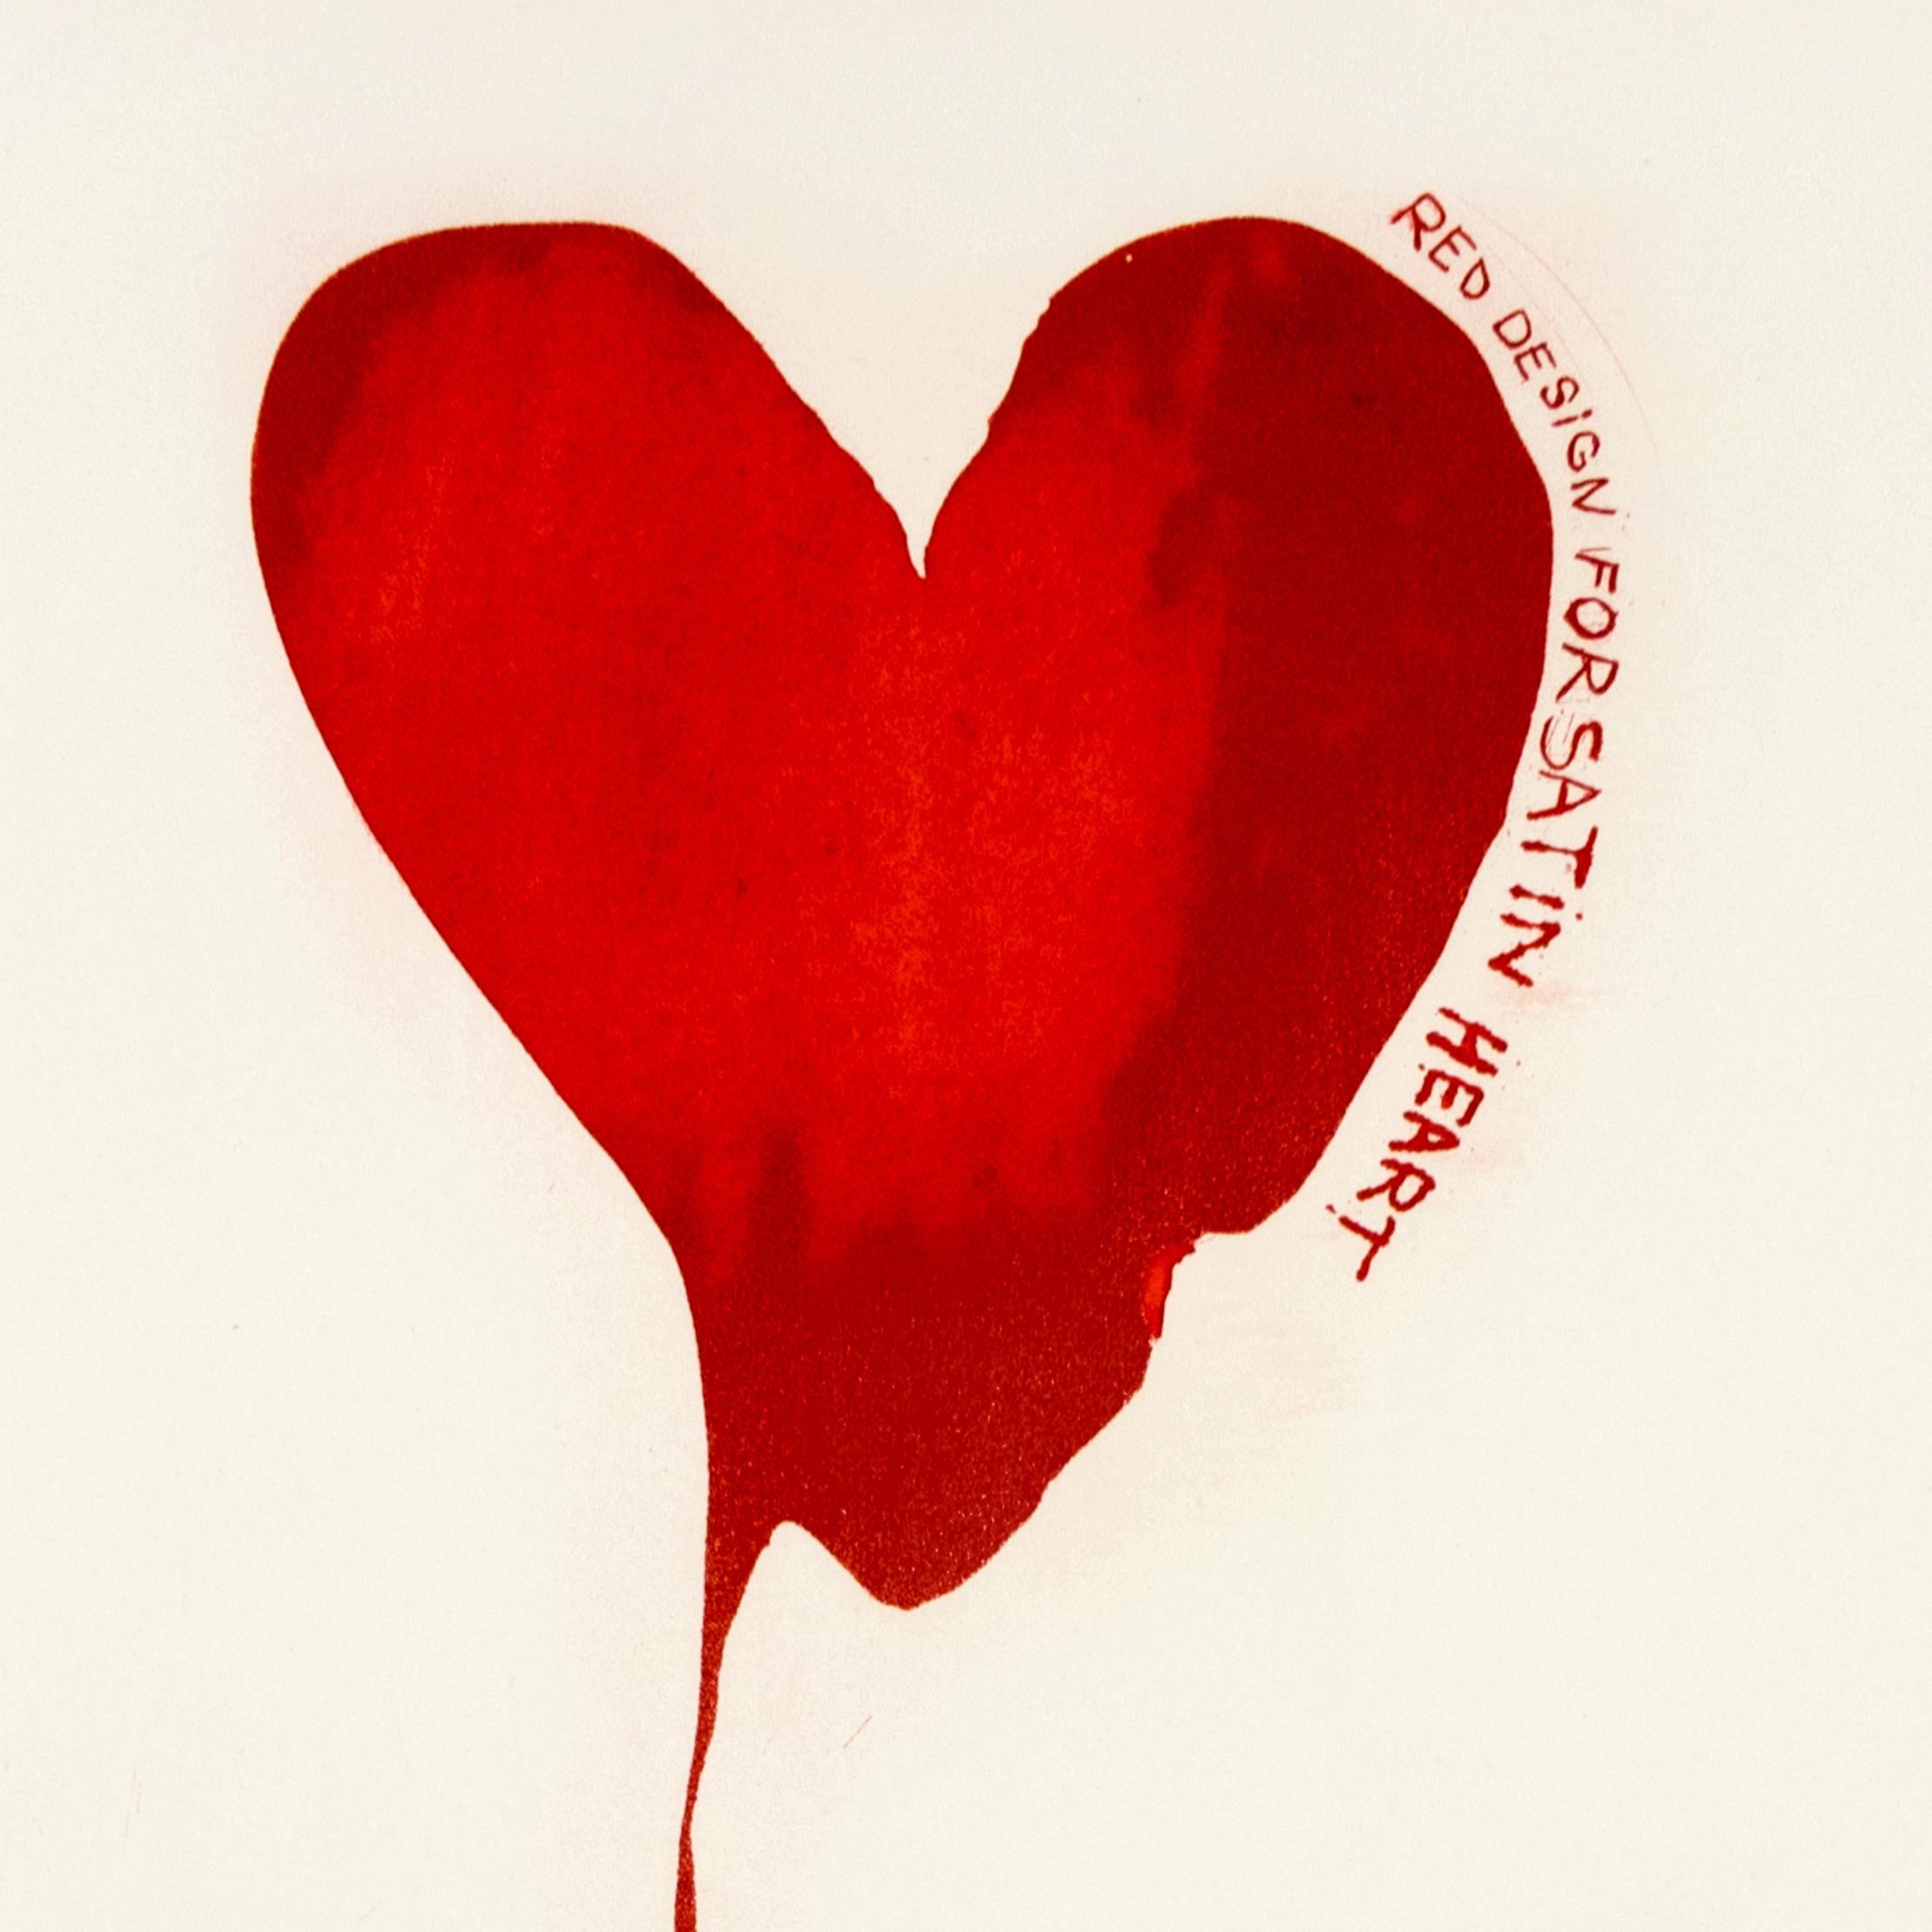 Jim Dine Red Design for Satin Heart "The Picture of Dorian Grey" bleeding heart